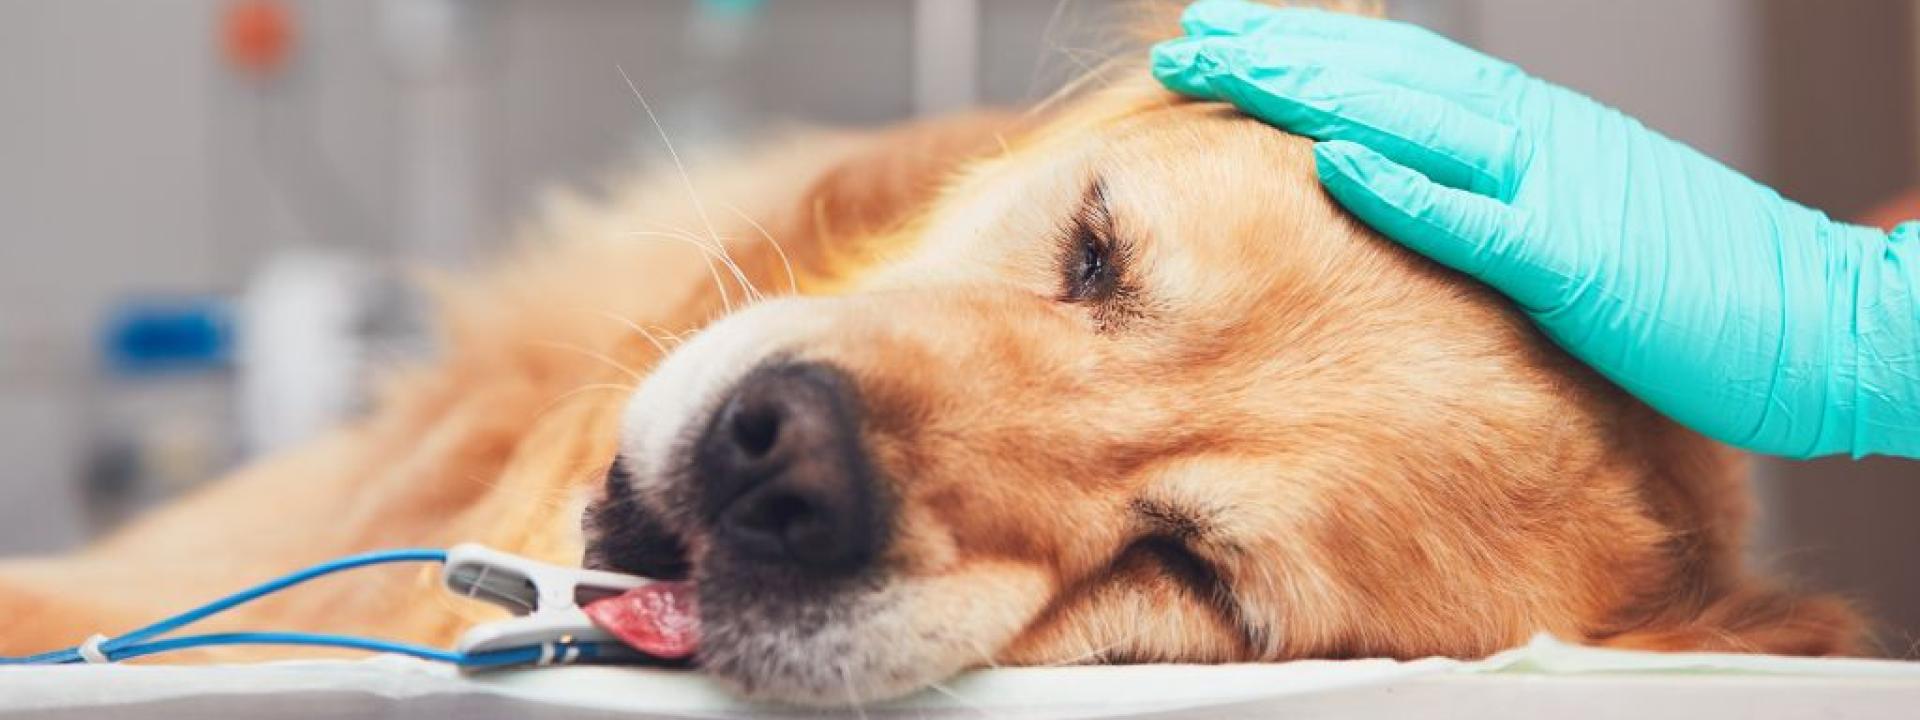 Golden retriever lying in the operating room before surgery after anesthesia.